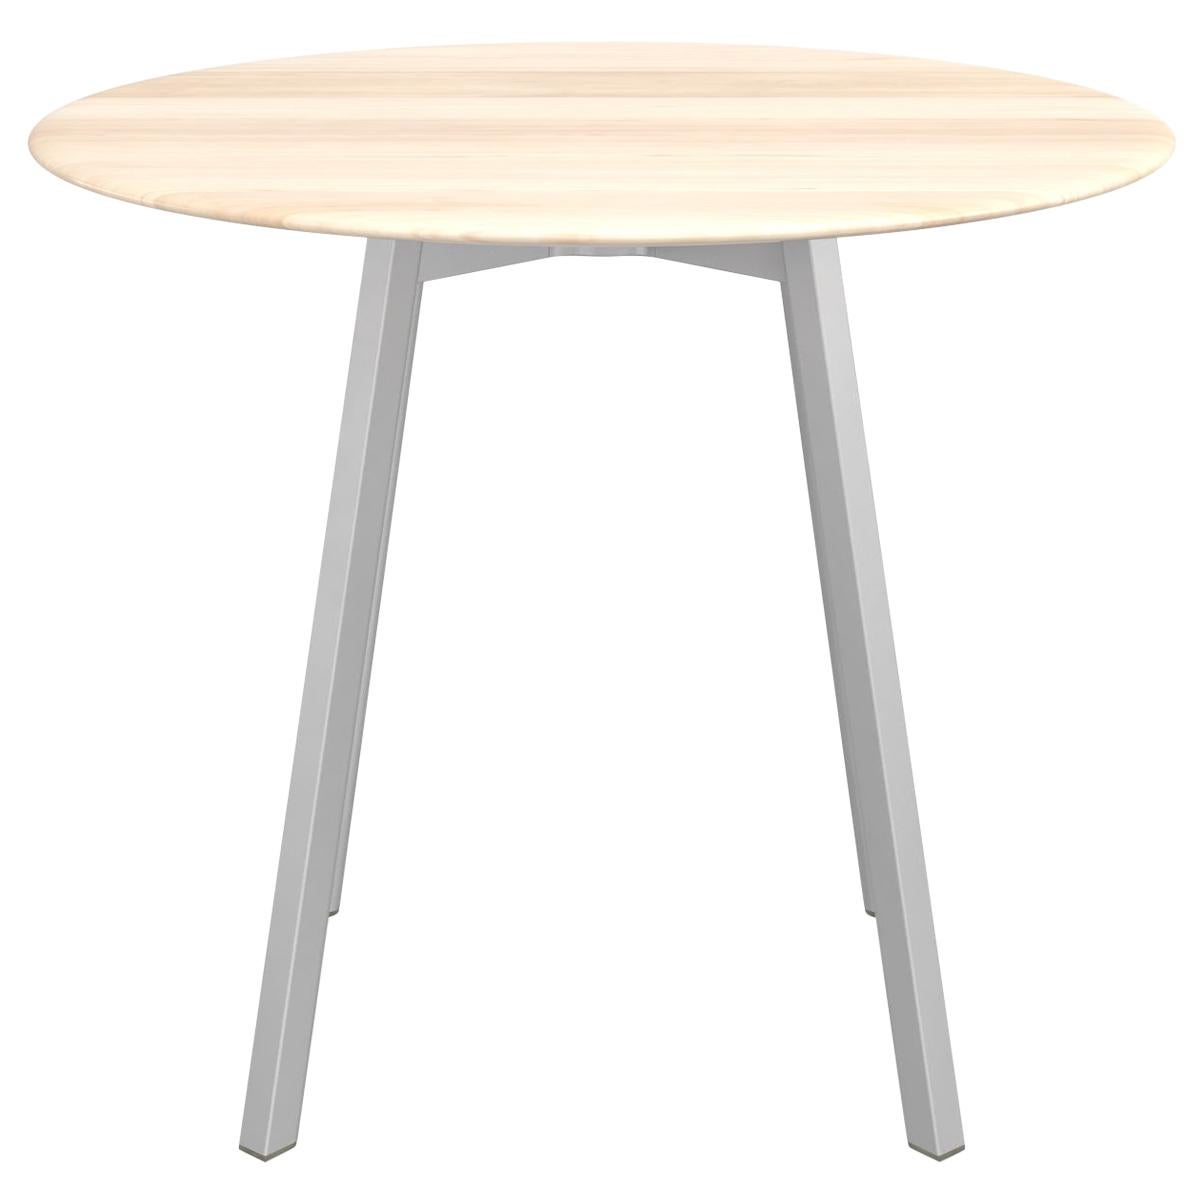 Emeco Su Large Round Cafe Table with Anodized Aluminum Frame & Wood Top by Nendo For Sale